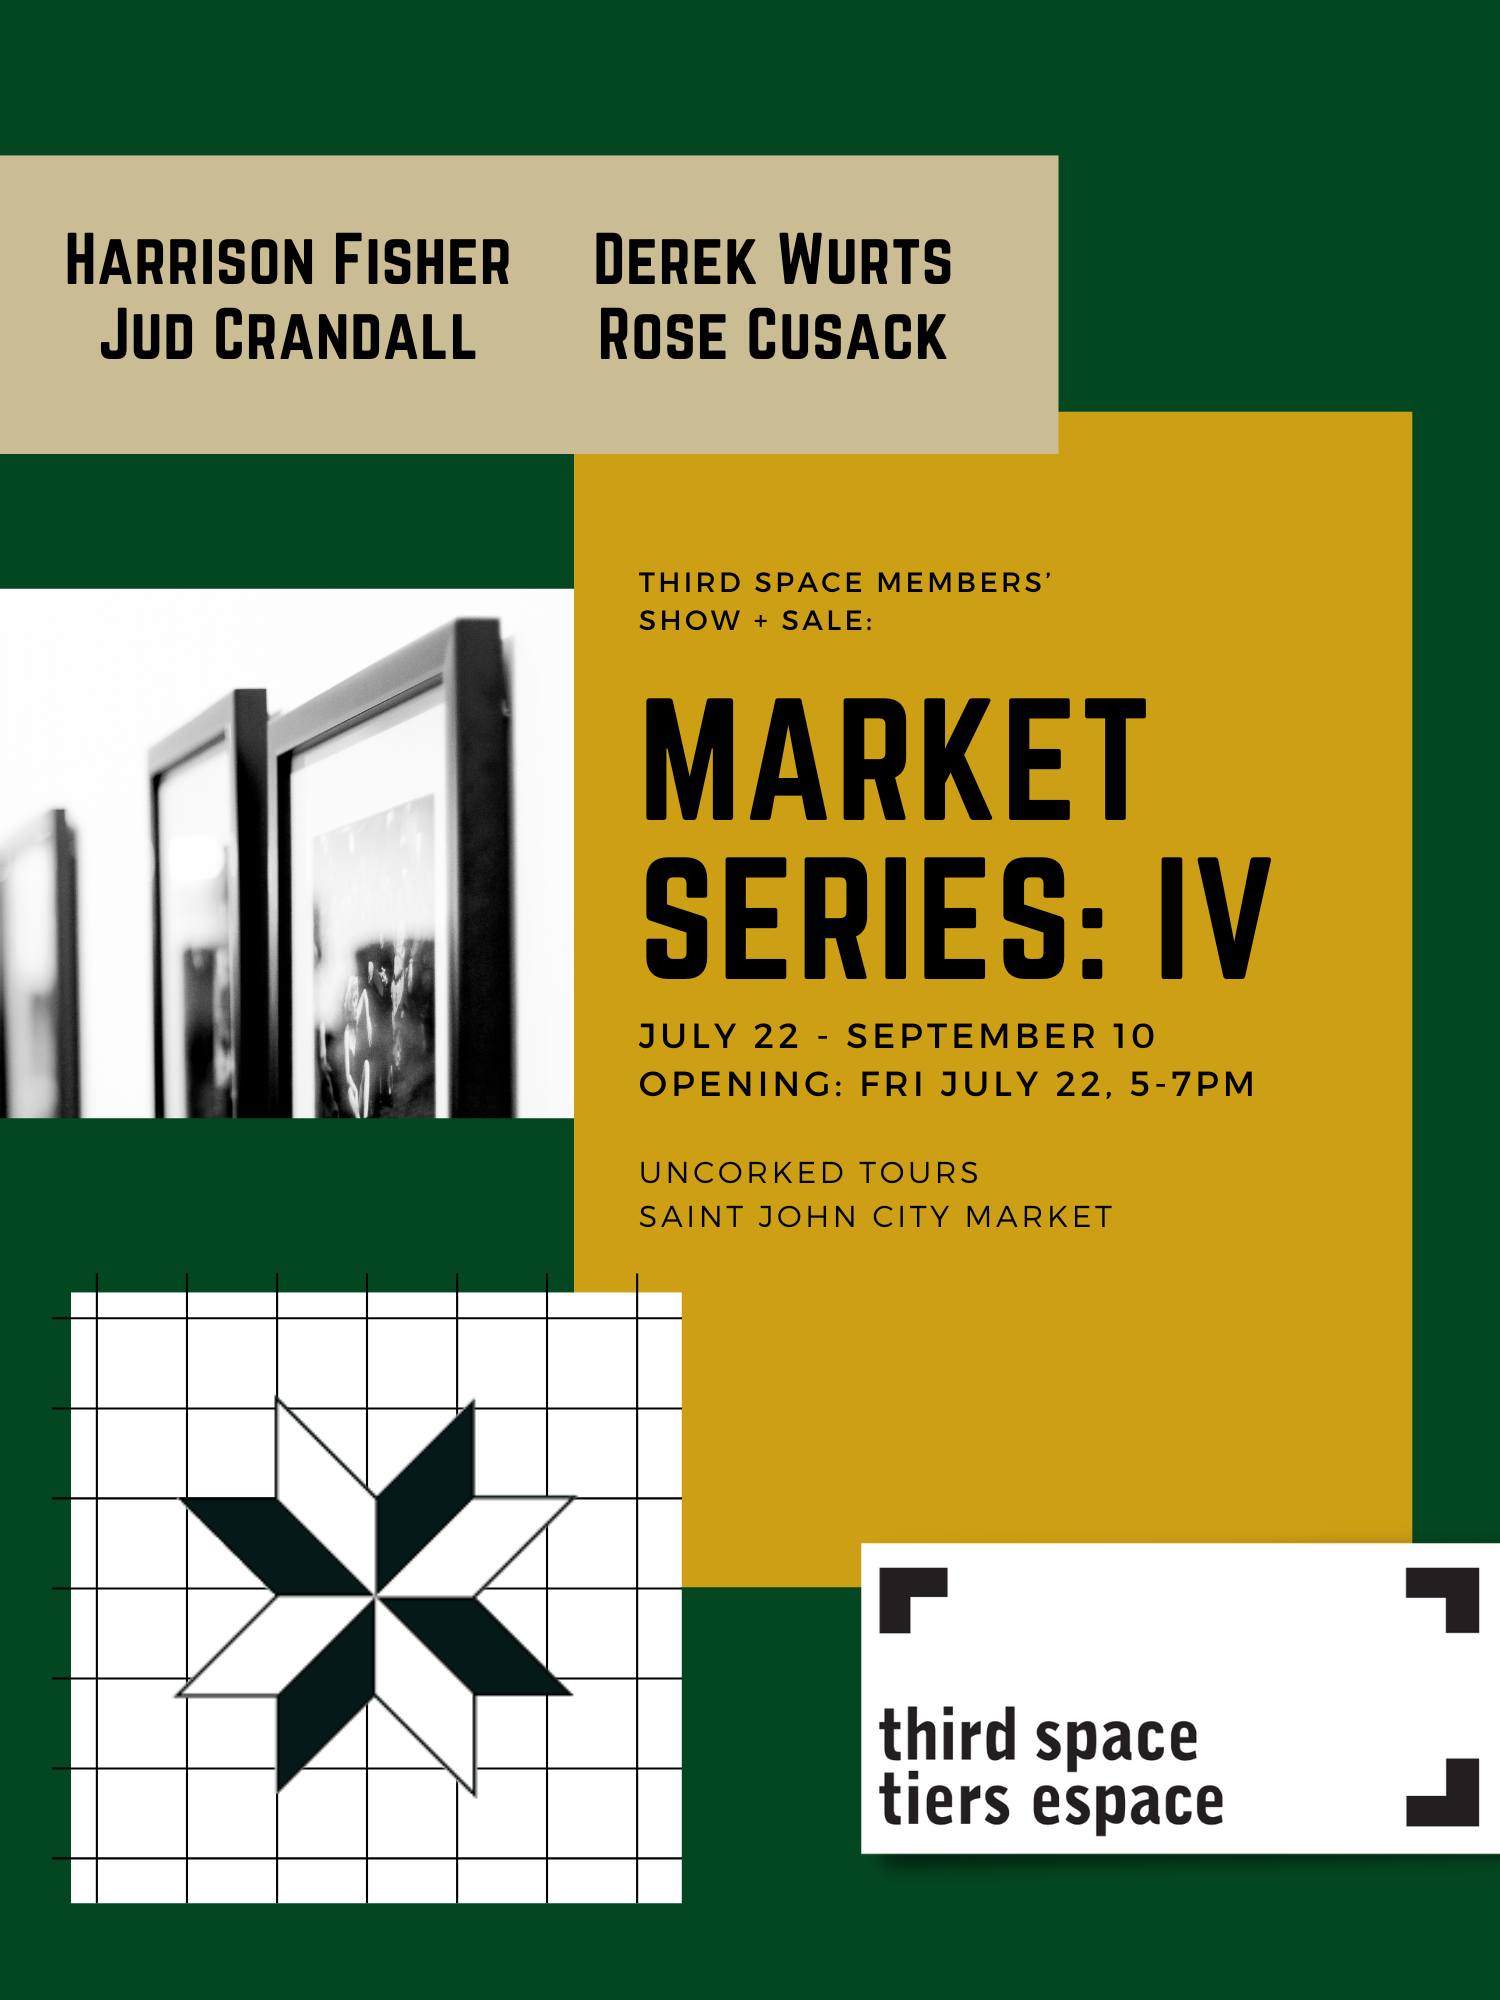 Third Space members' show and sale. Market Series IV. July 22 - September 10. Opening Friday, July 22, 5-7pm. Uncorked Tours, Saint John City Market.